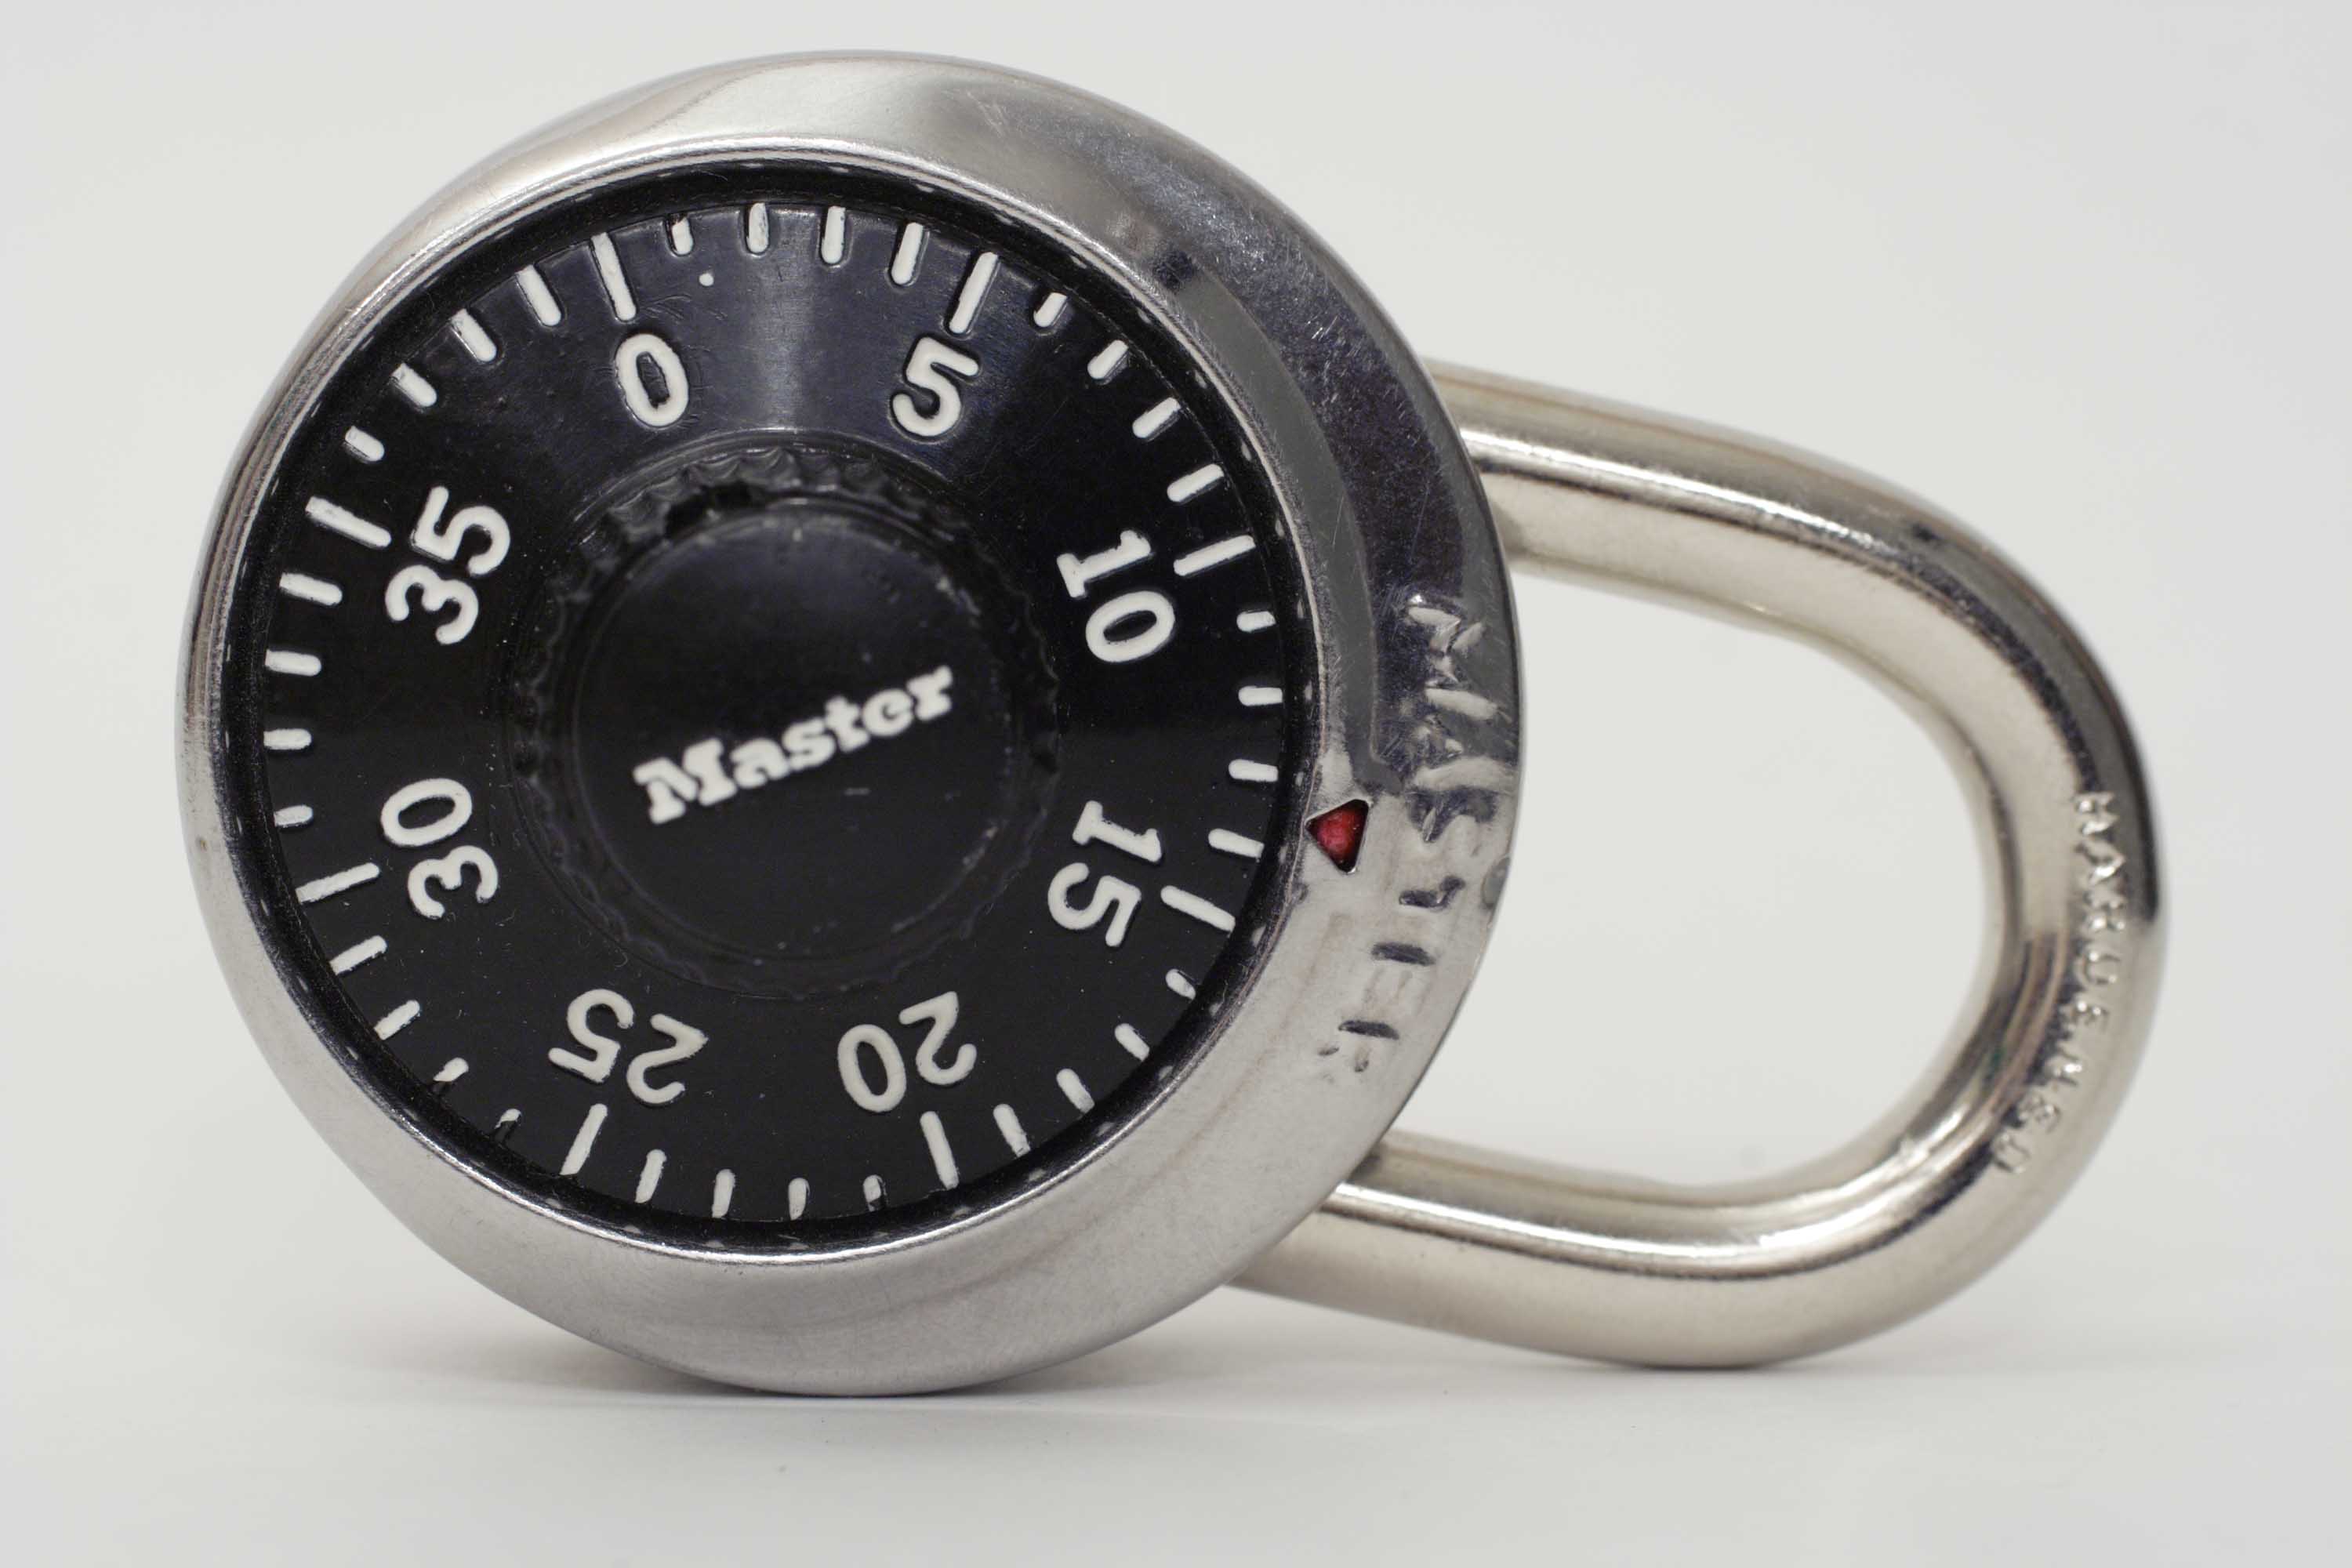 How to Crack a Master Lock Combination Lock: 2 Ways